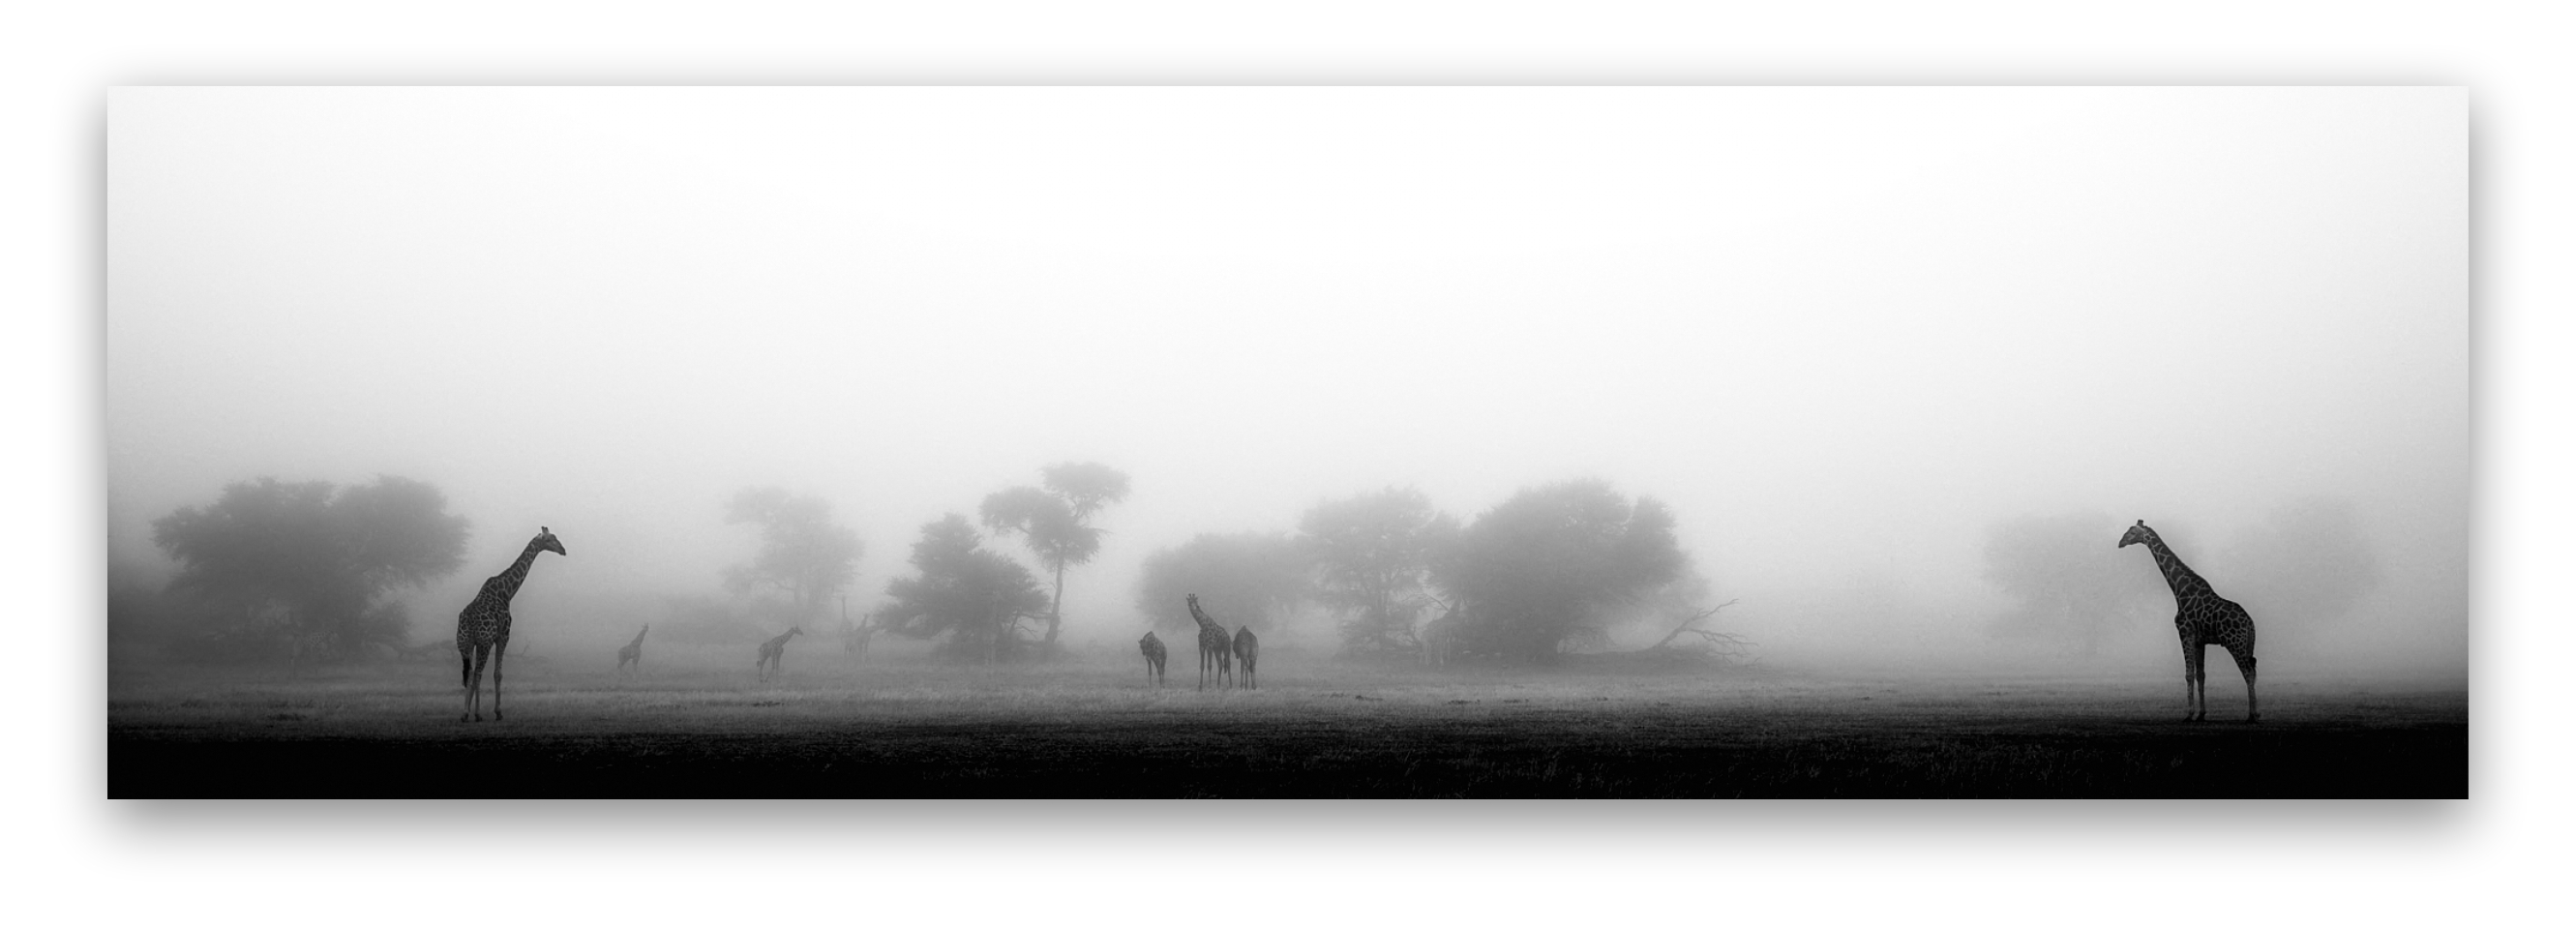 Giraffes in the mist - a reminder of home